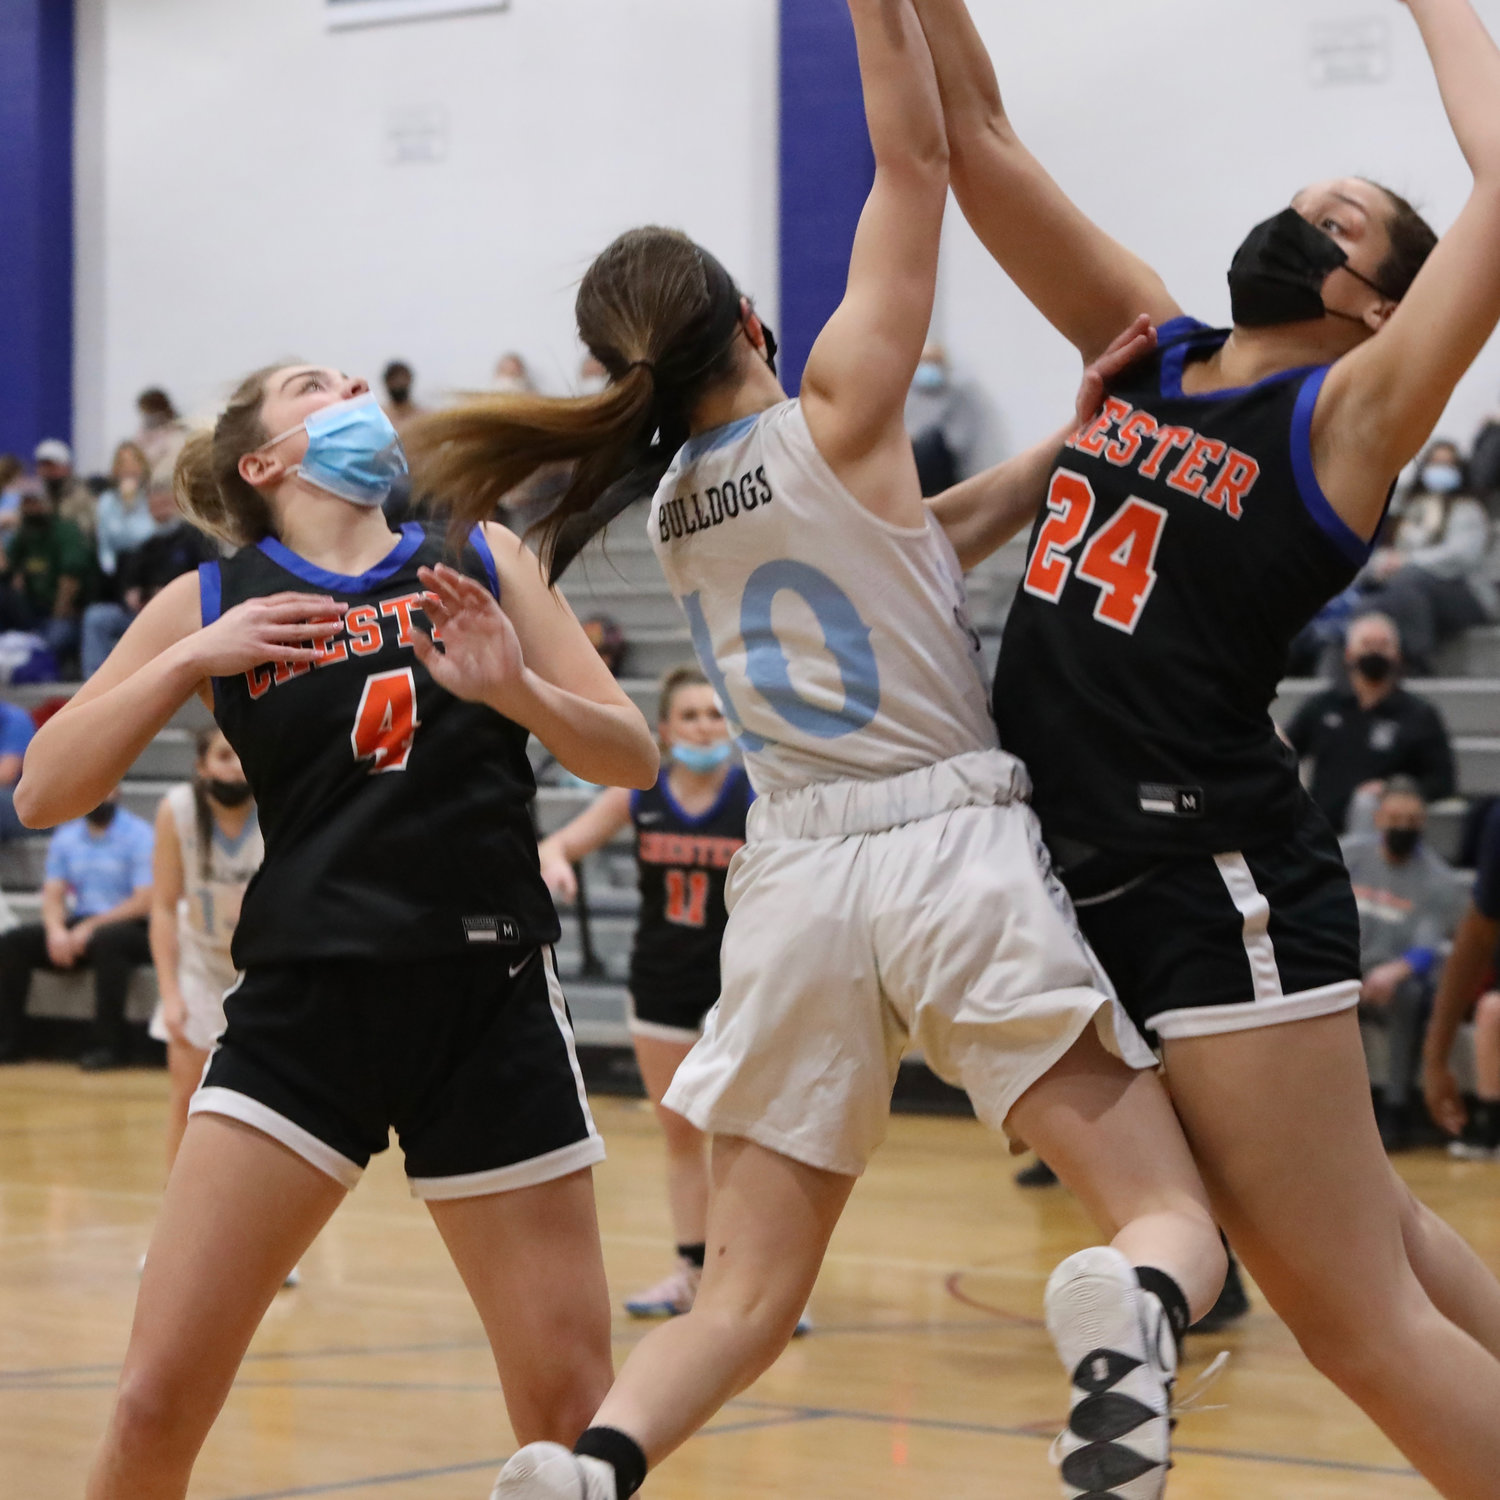 There were no easy runs to the rim. Every attempt was met by staunch defense as Grace Boyd discovered by being fronted by Allison Bono and Trinity Delgado. Trapping caused more than 20 first half turnovers, so even getting the ball down the court became problematic.